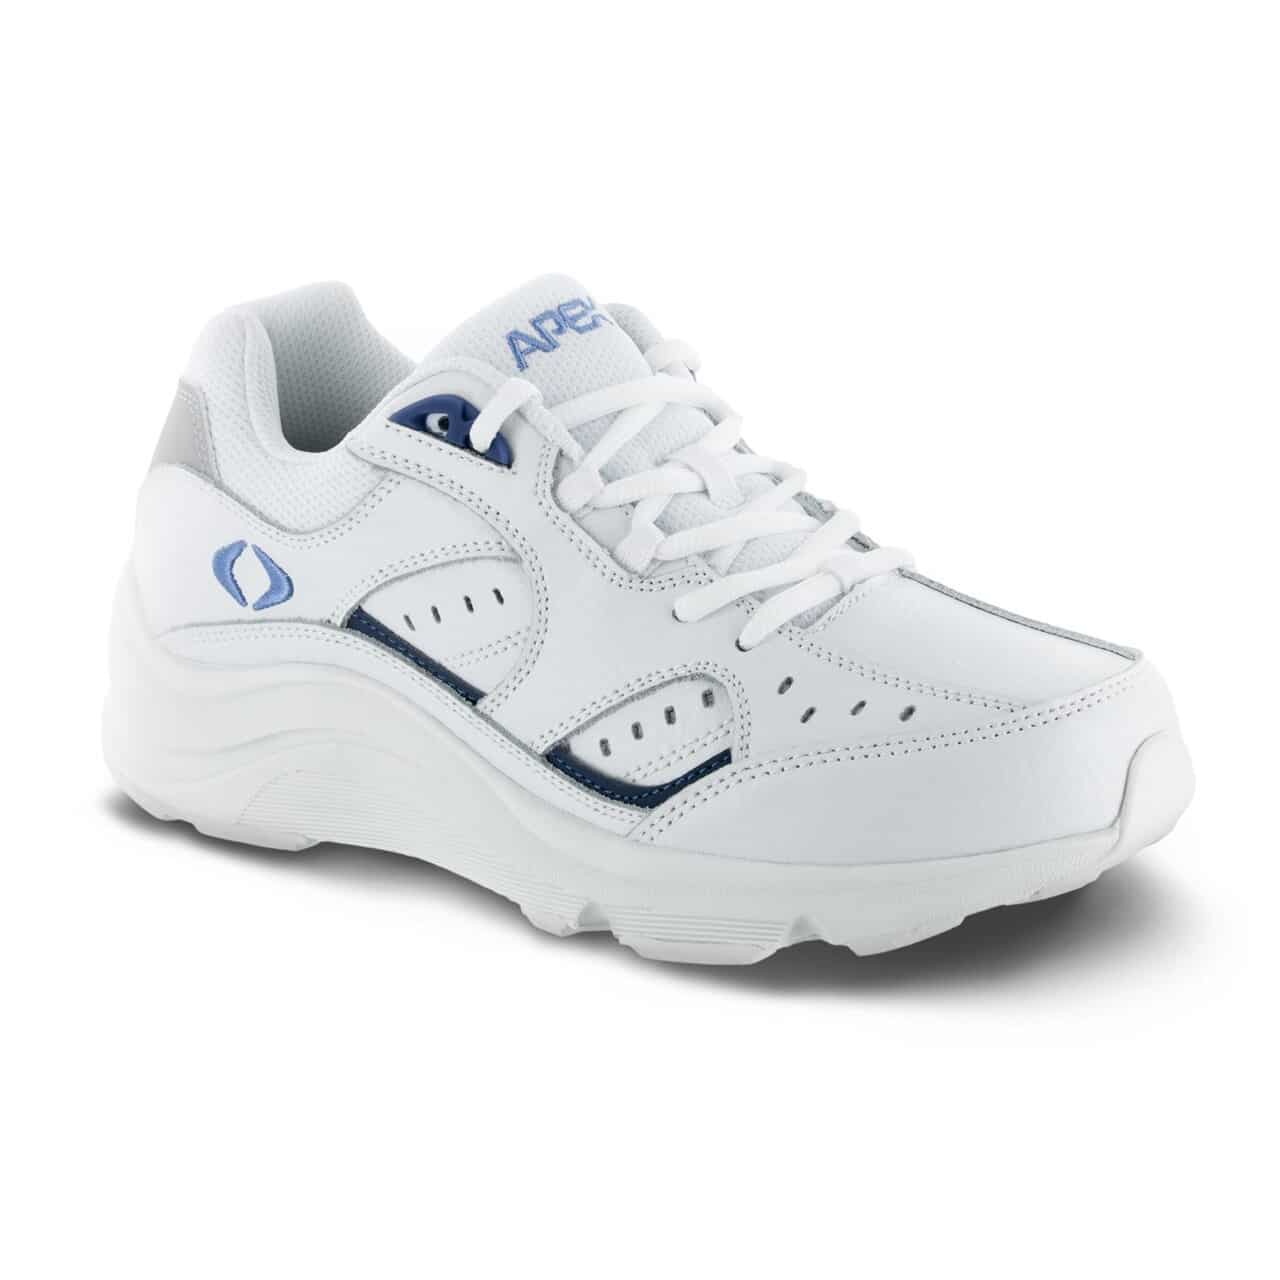 Apex Women's Shoe Walker V-Last Wide Toebox White and Periwinkle with wide toe box